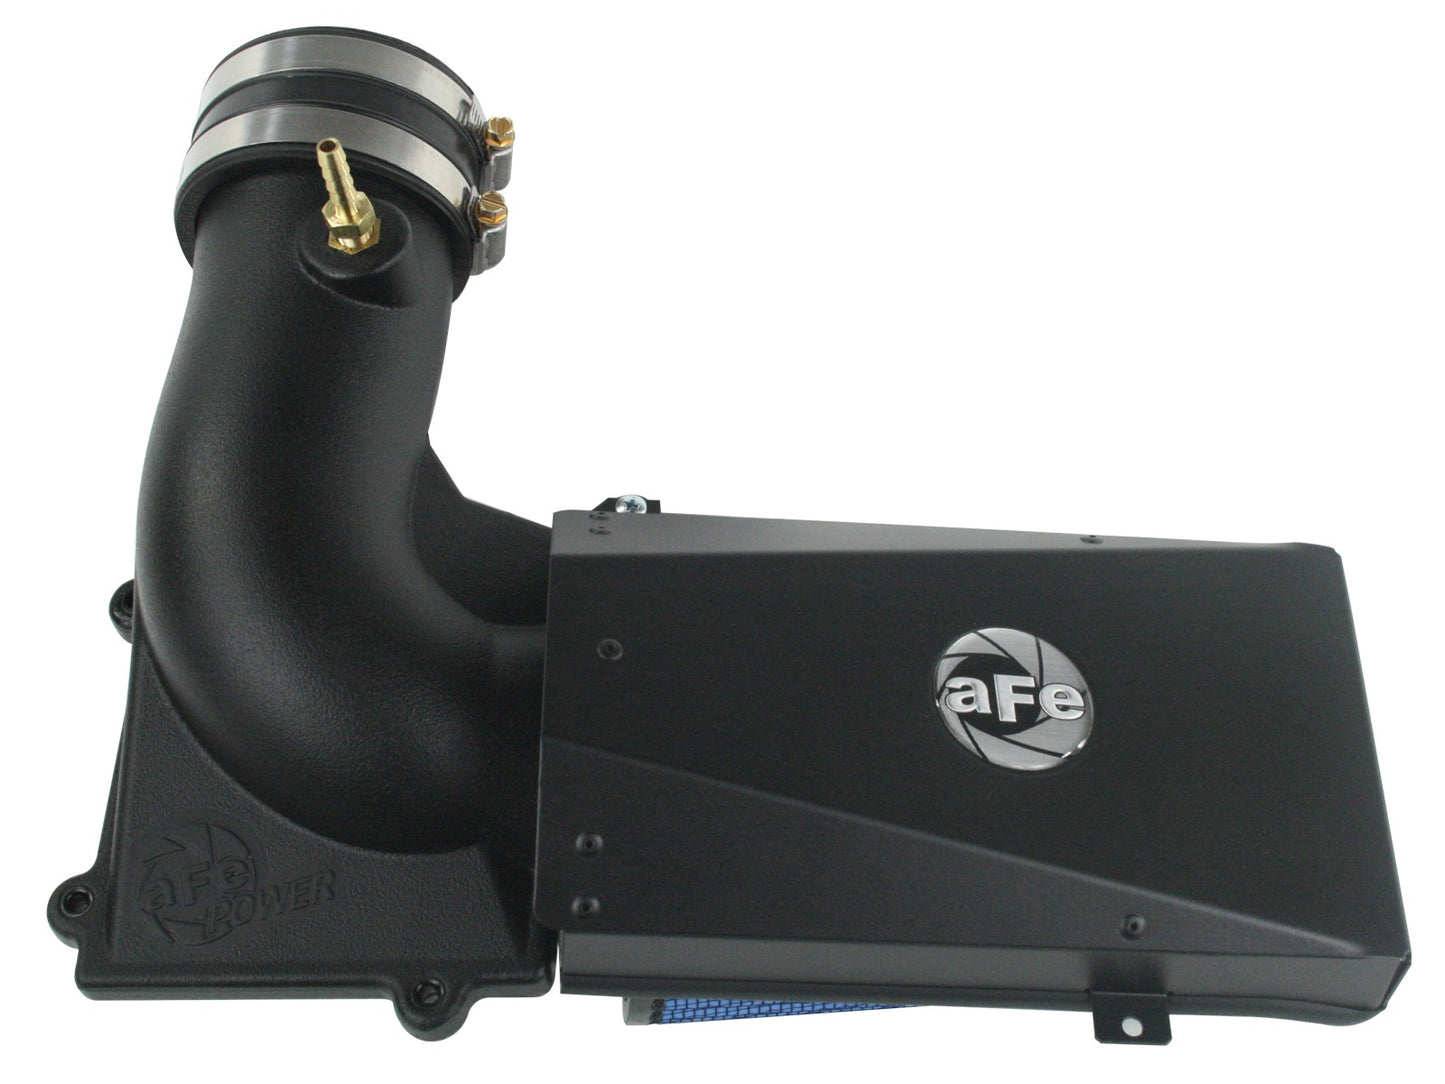 aFe Audi/VW Magnum FORCE Stage-2 Si Pro 5R Cold Air Intake System (Audi A3, VW Jetta)